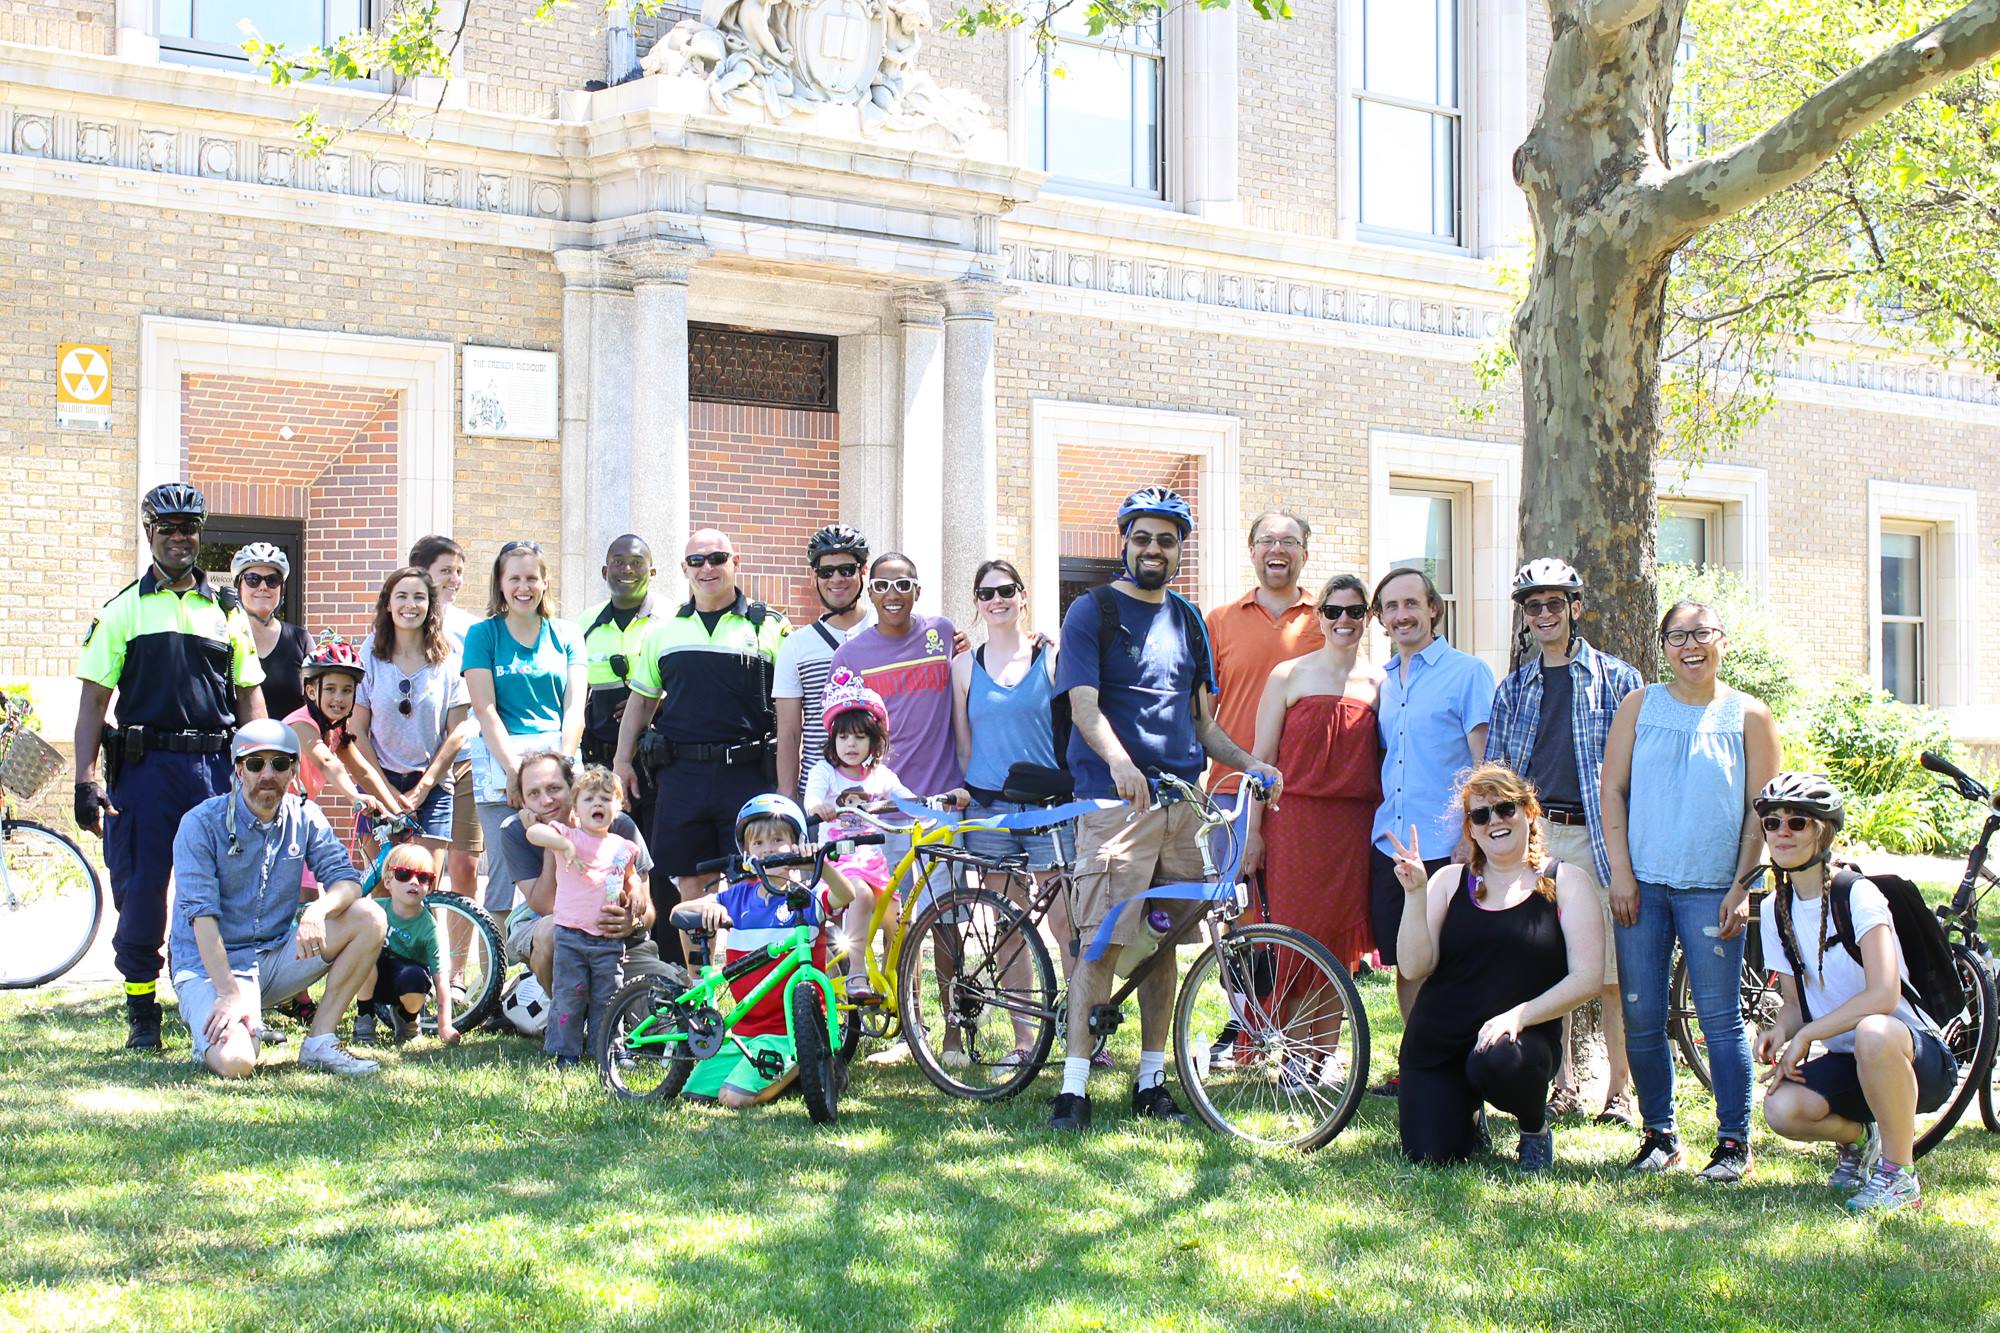 Participants in the 2016 Library Bike Ride to benefit the Somerville Public Library